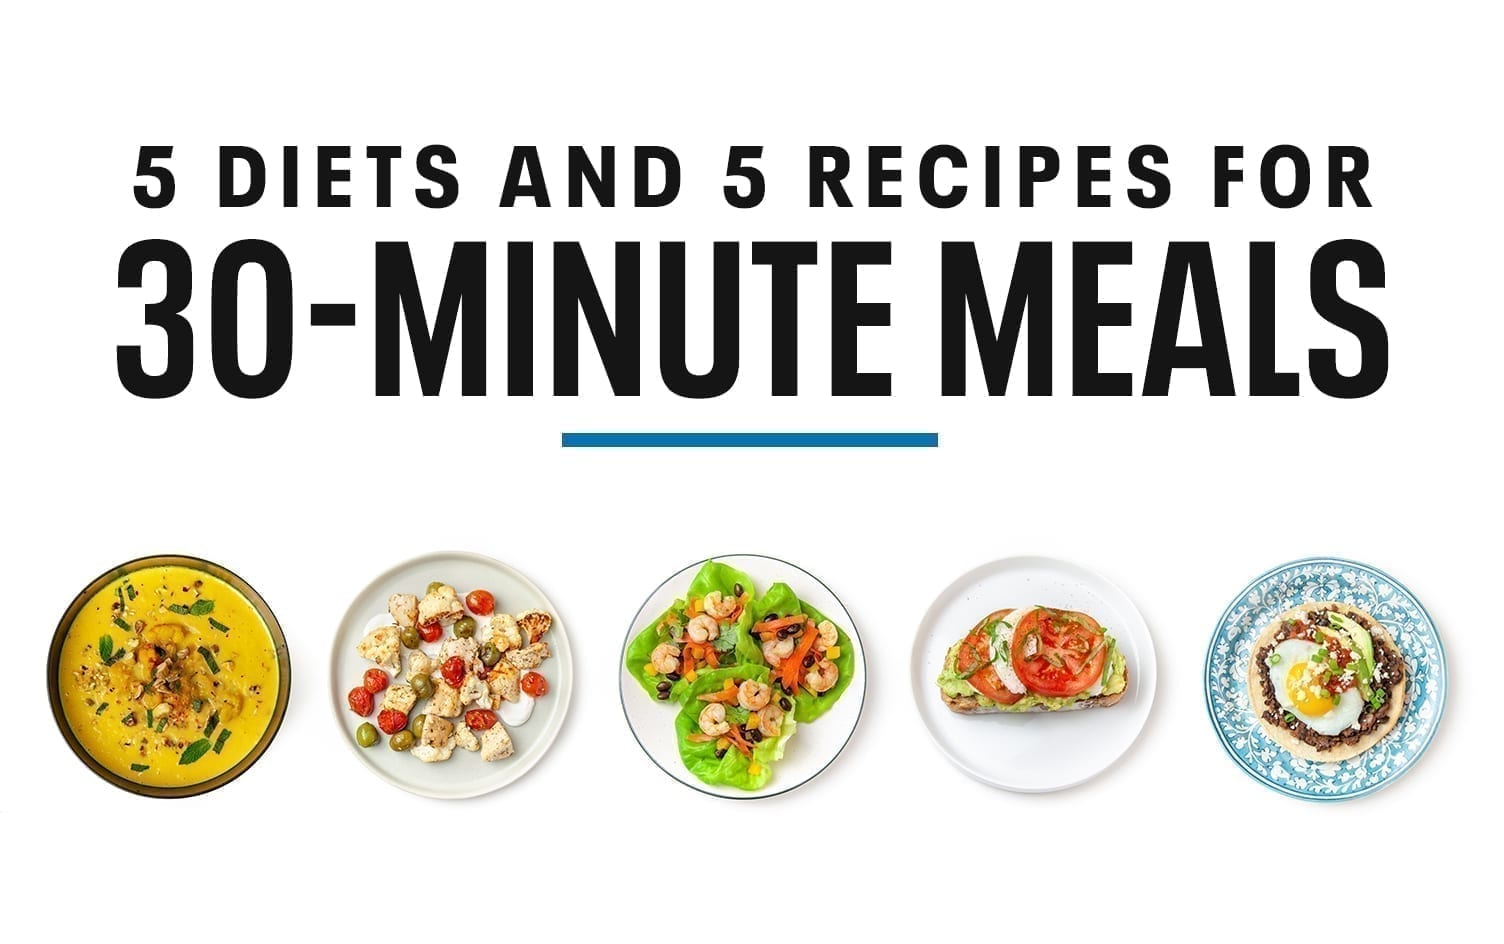 5 Diet-Friendly Recipes For 30-Minute Meals